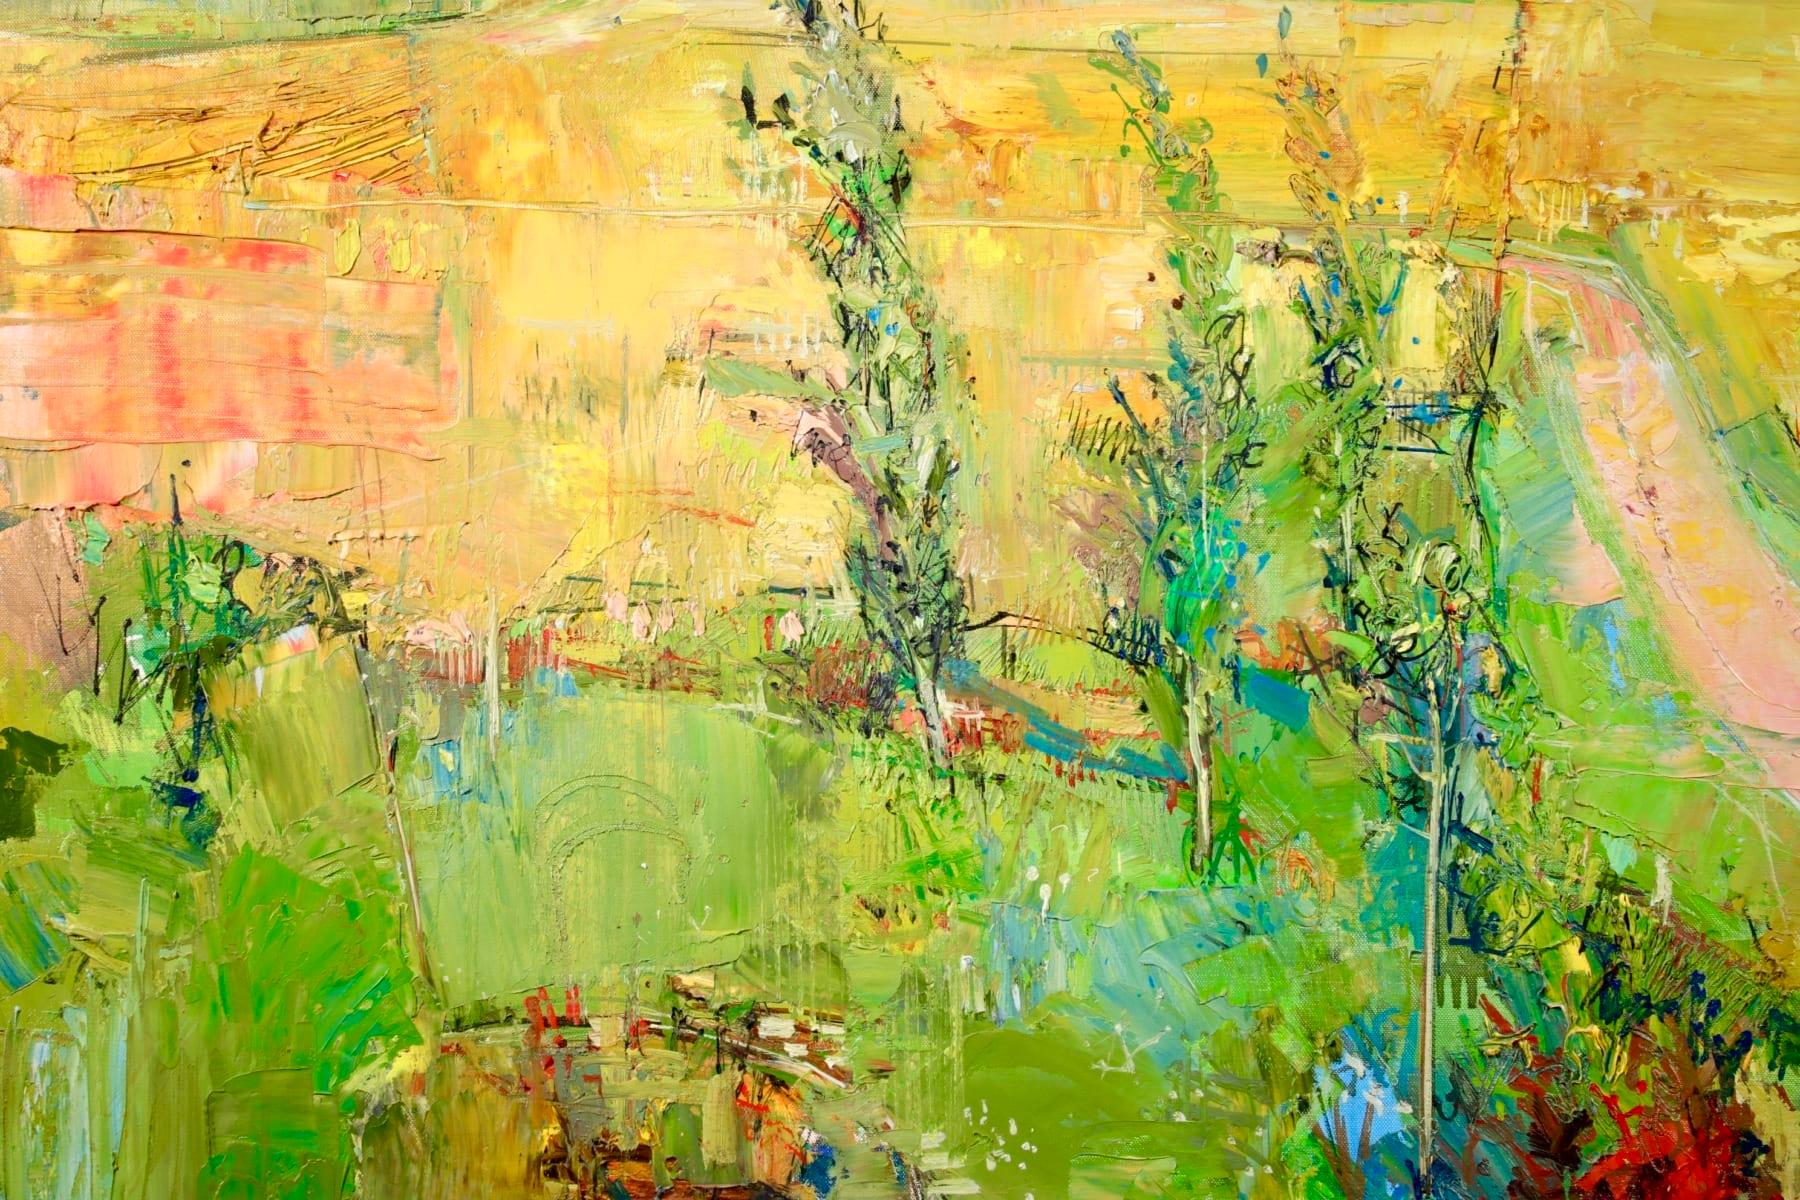 A delightful large oil on canvas circa 1960 by French Post Impressionist painter Jean Yves Commere depicting a summer landscape - the yellow fields beautifully contrasted by the light blue sky and the green garden to the foreground.